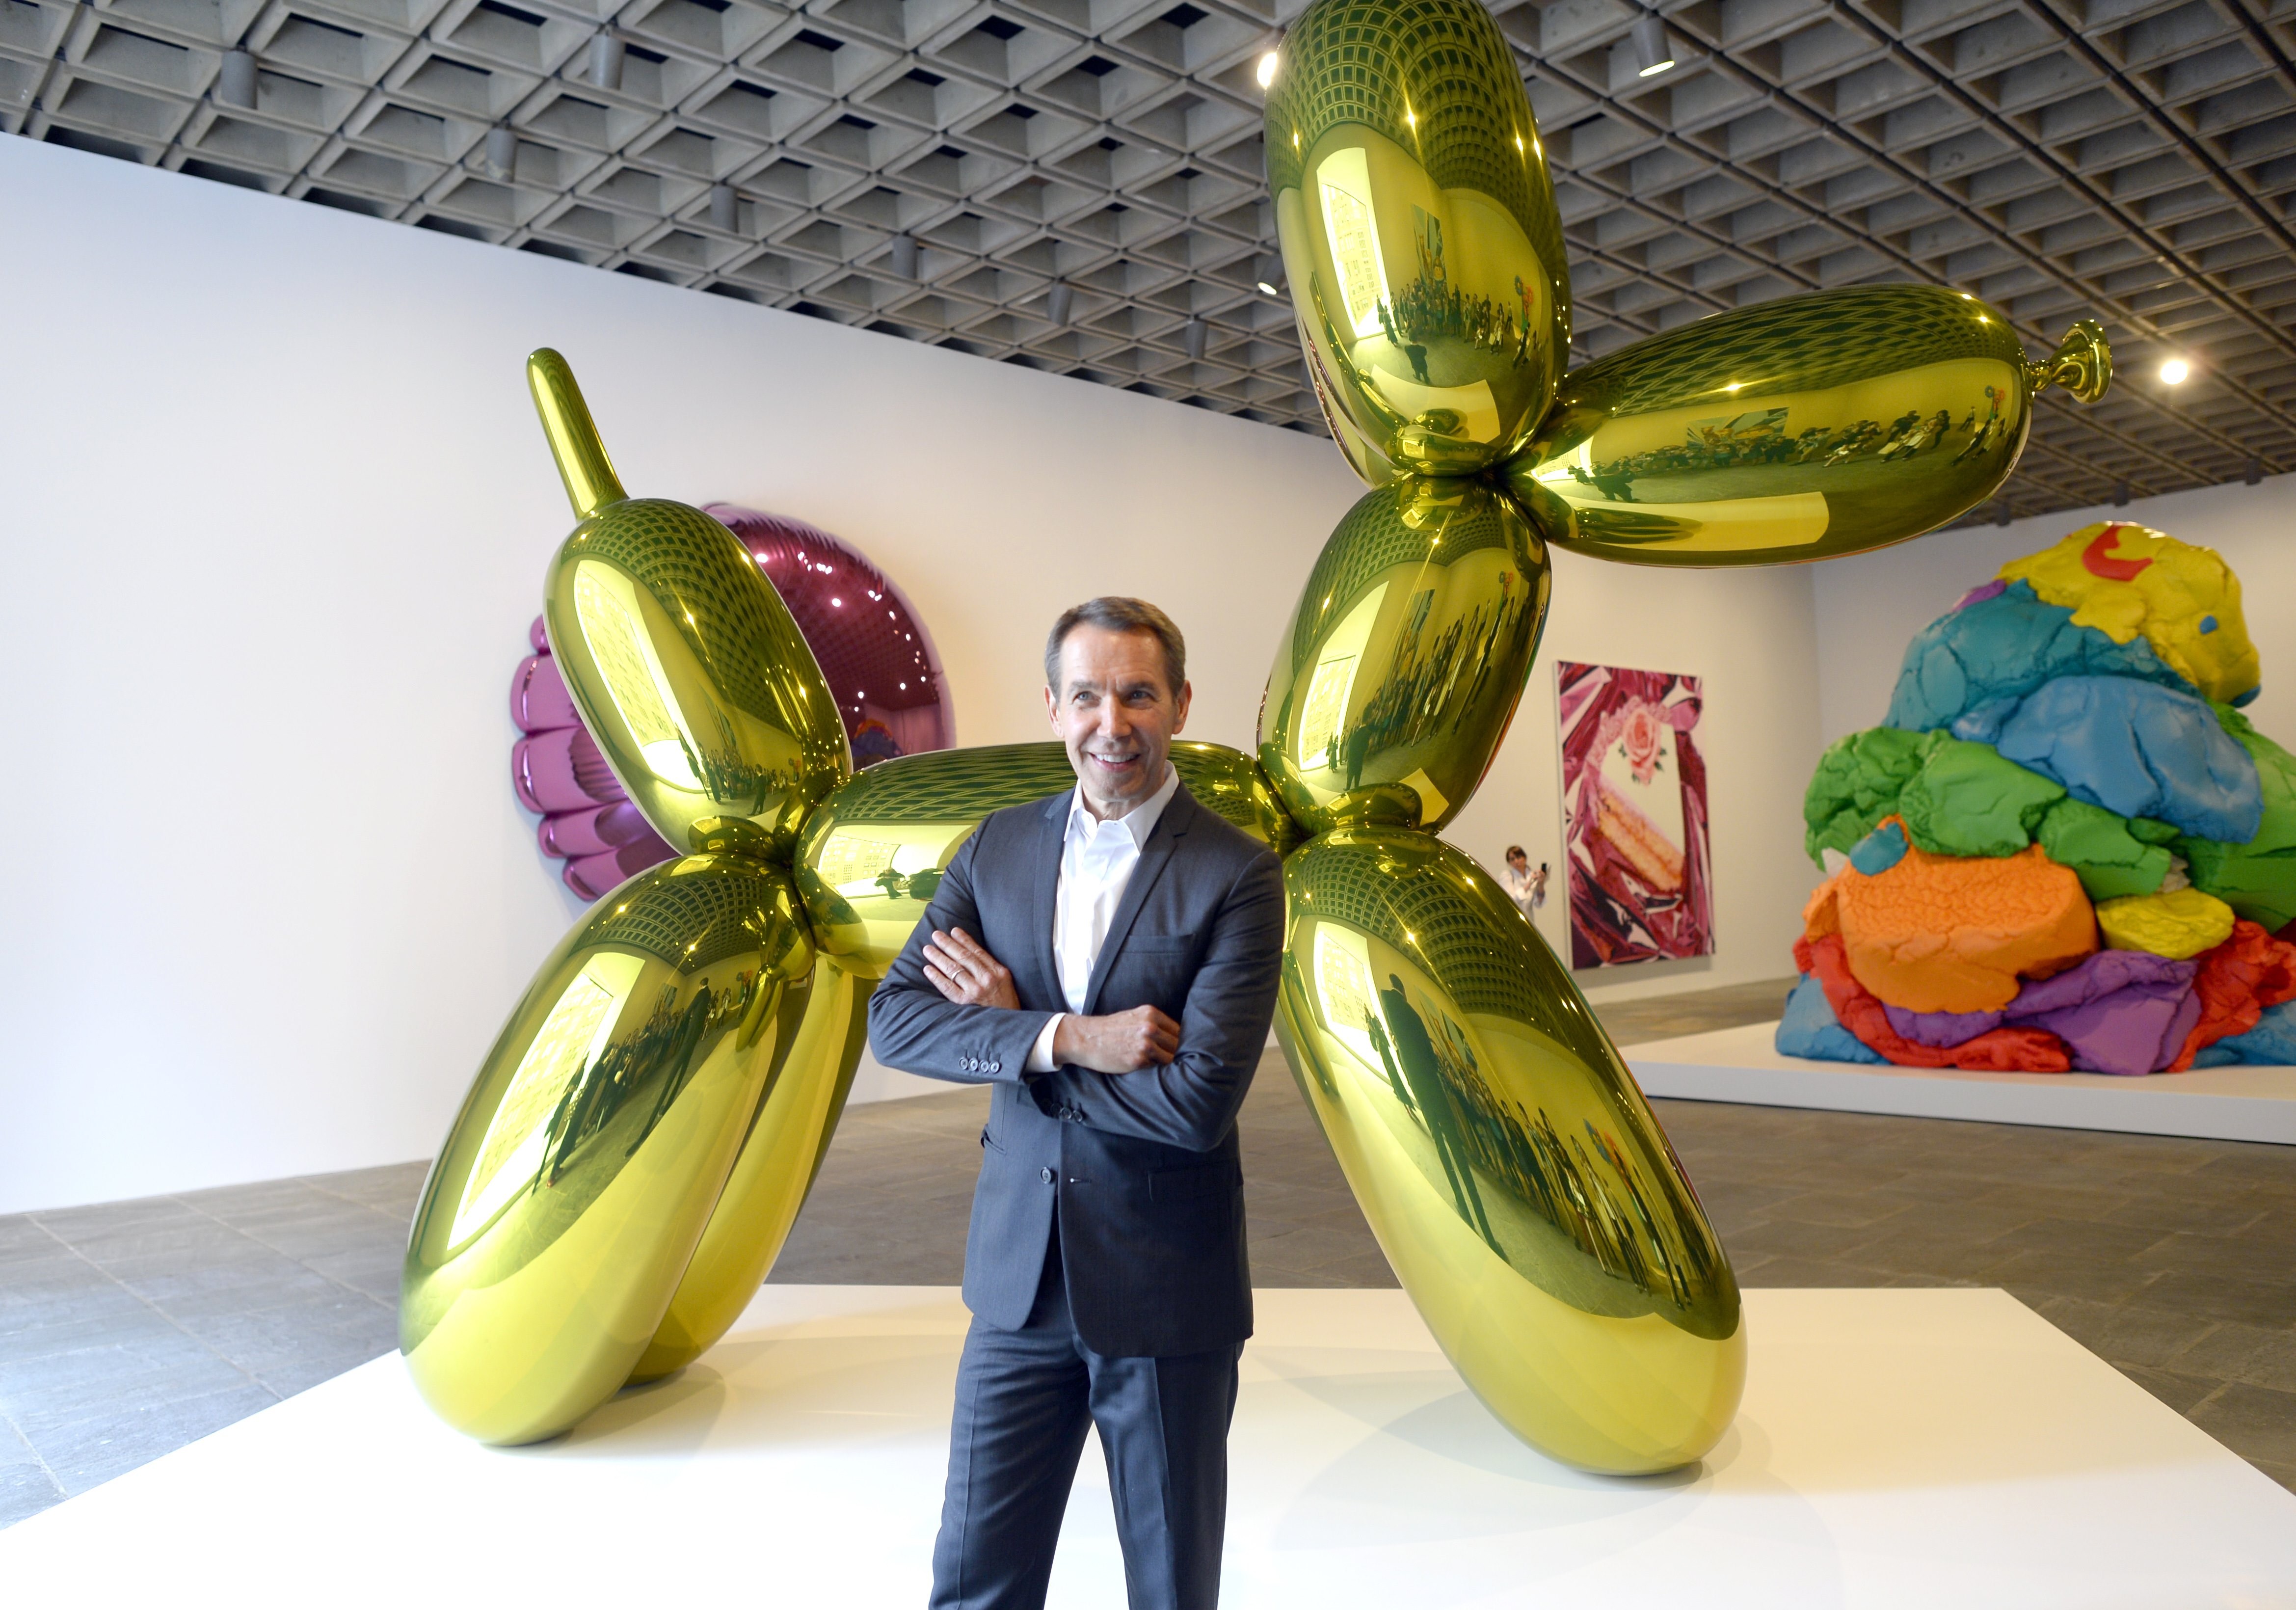 Artist Jeff Koons poses next to one of his sculptures during a press preview of "Jeff Koons: A Retrospective" a exhibition of his work at the Whitney Museum of American Art June 24, 2014. (TIMOTHY A. CLARY&mdash;AFP/Getty Images)